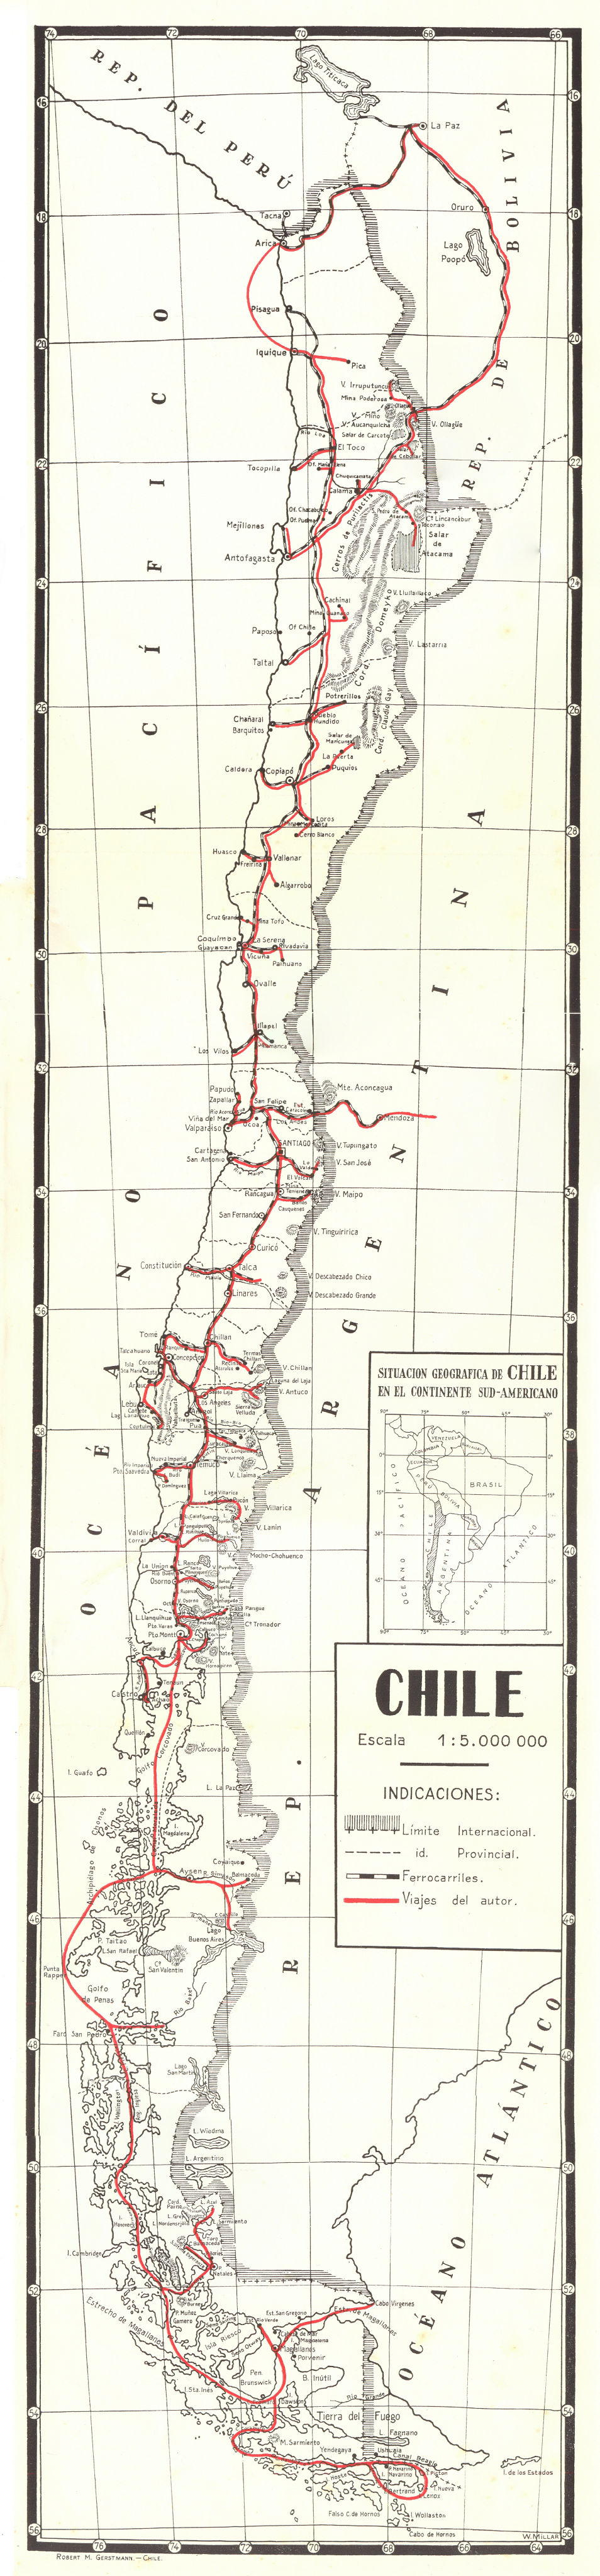 Associate Product Full length map of Chile. 88 x 20cm by Robert Gerstmann 1932 old vintage